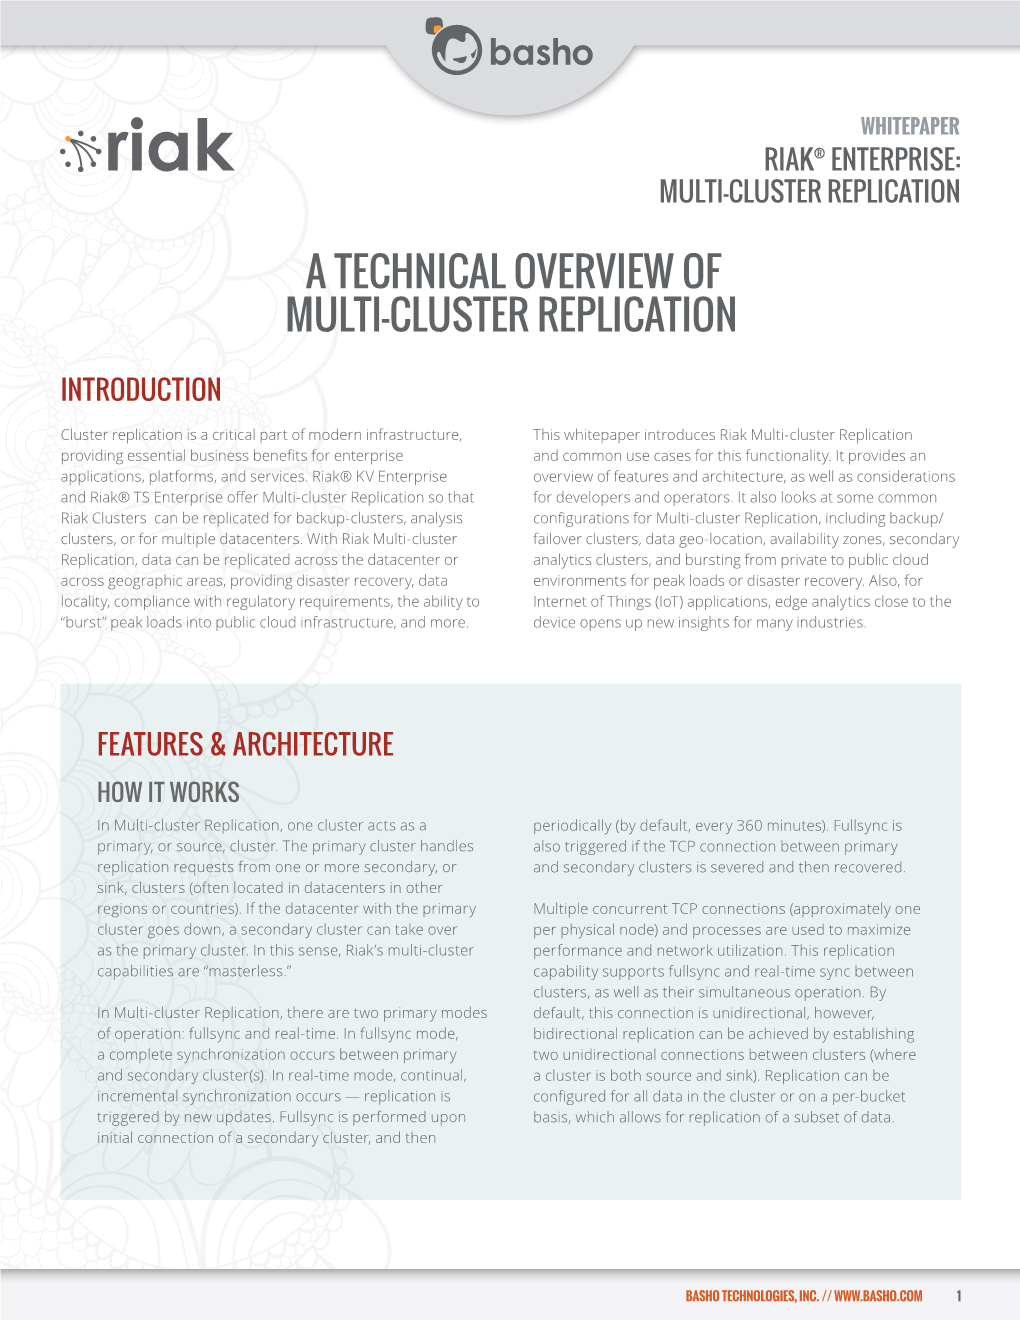 A Technical Overview of Multi-Cluster Replication